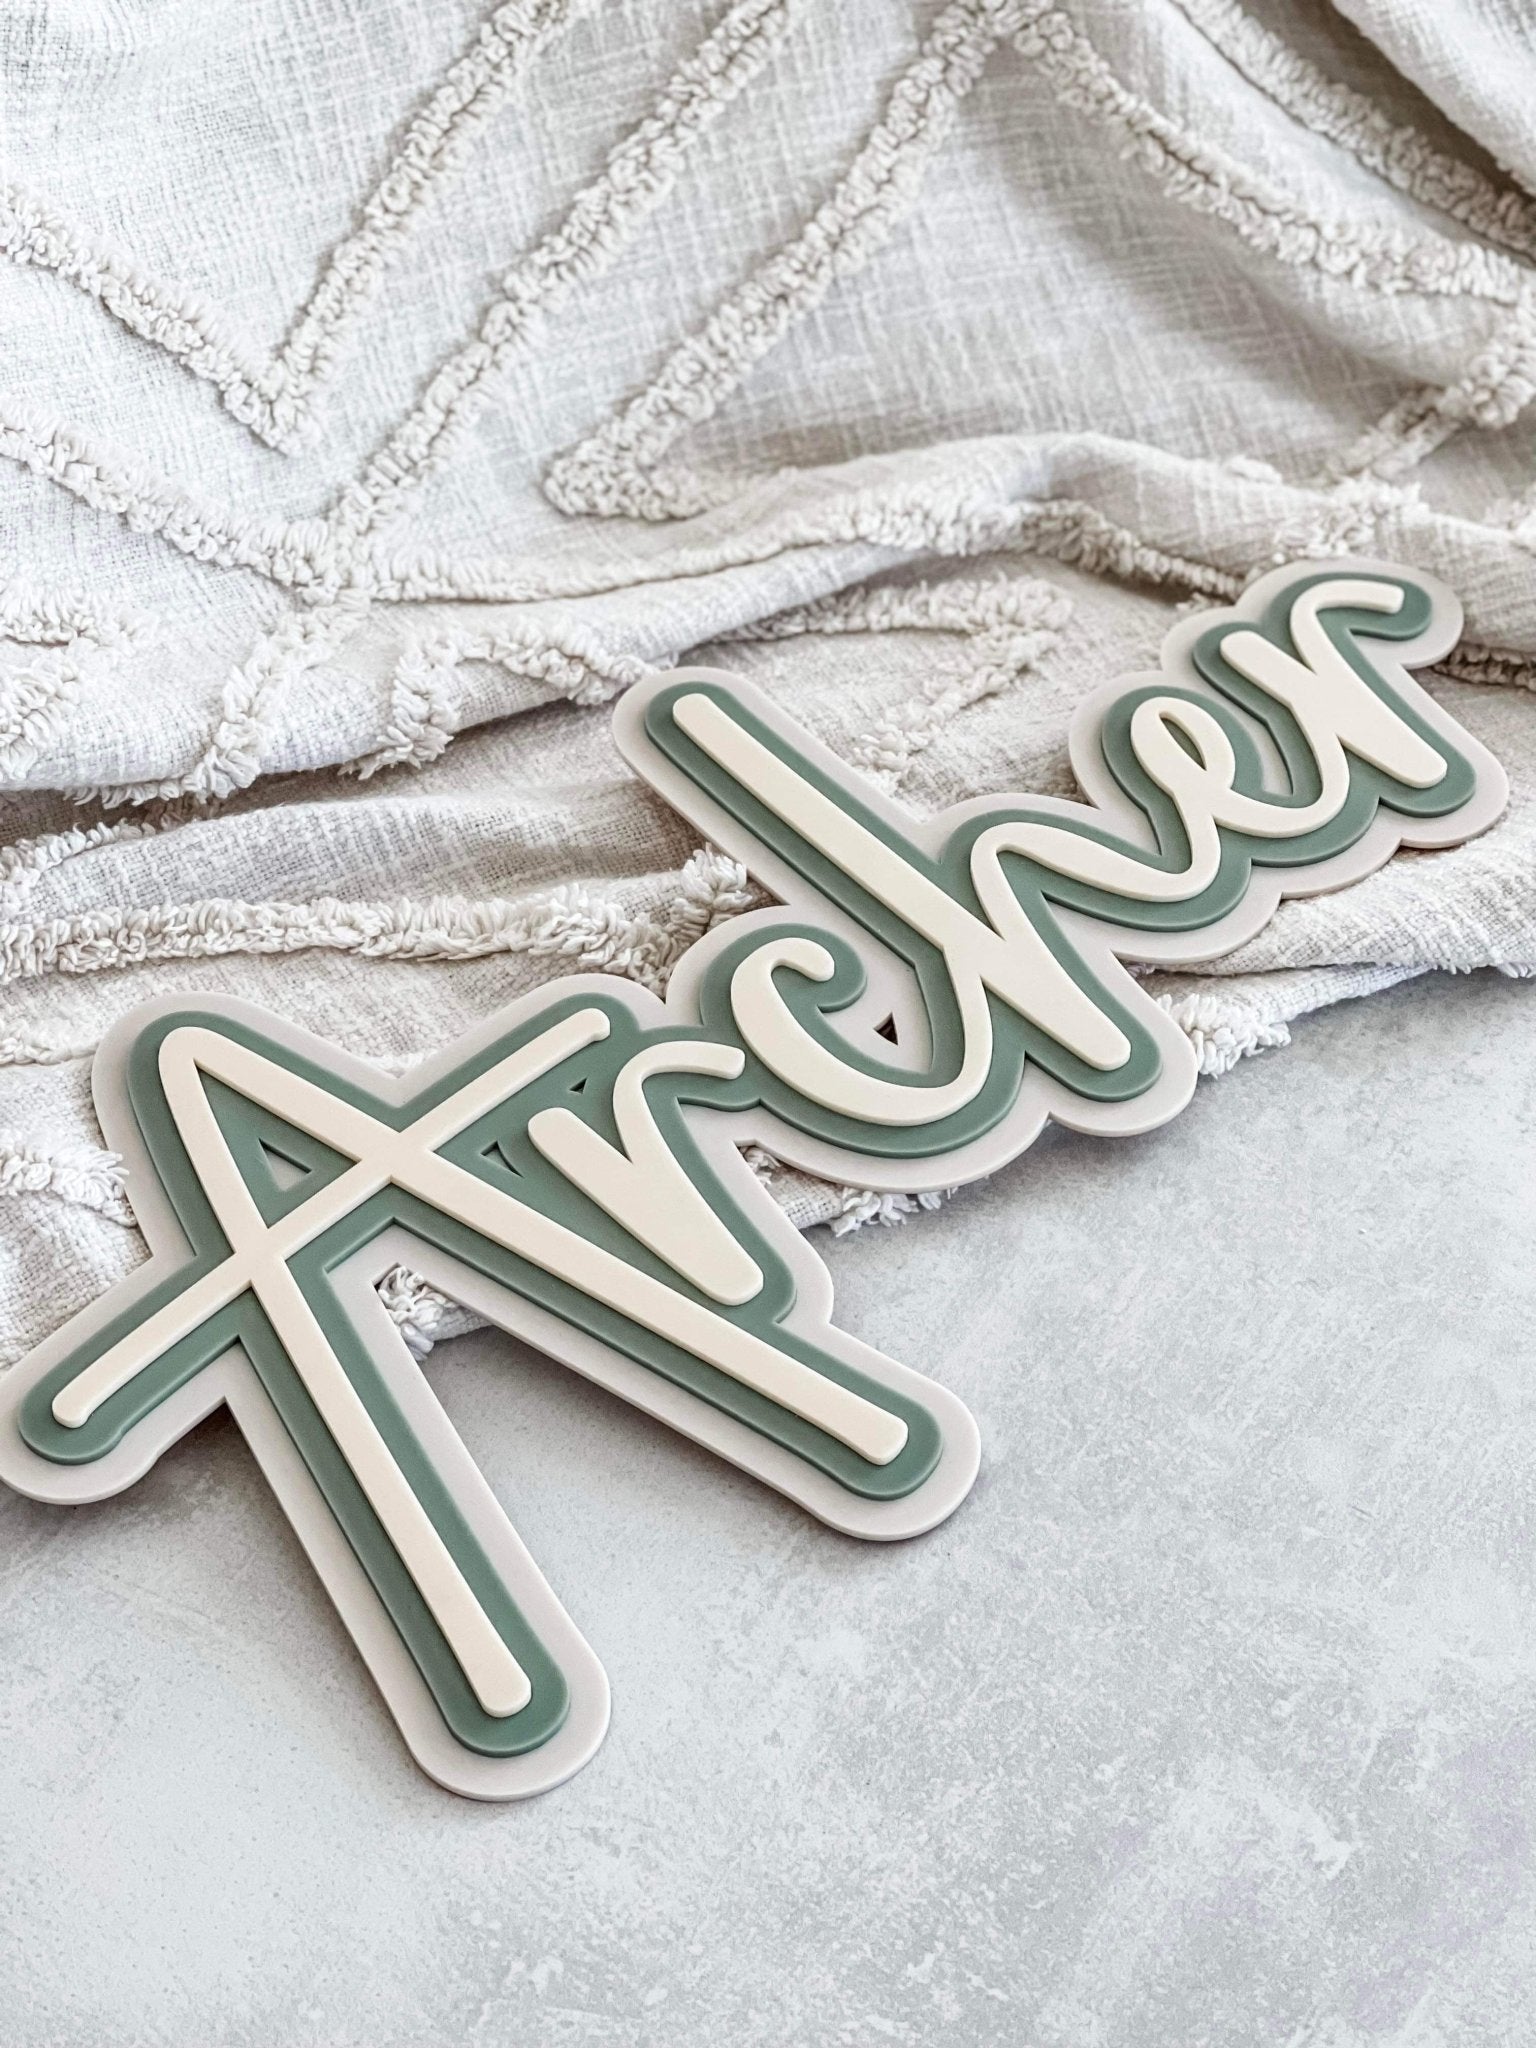 Triple layered name plaque - The Humble Gift Co.